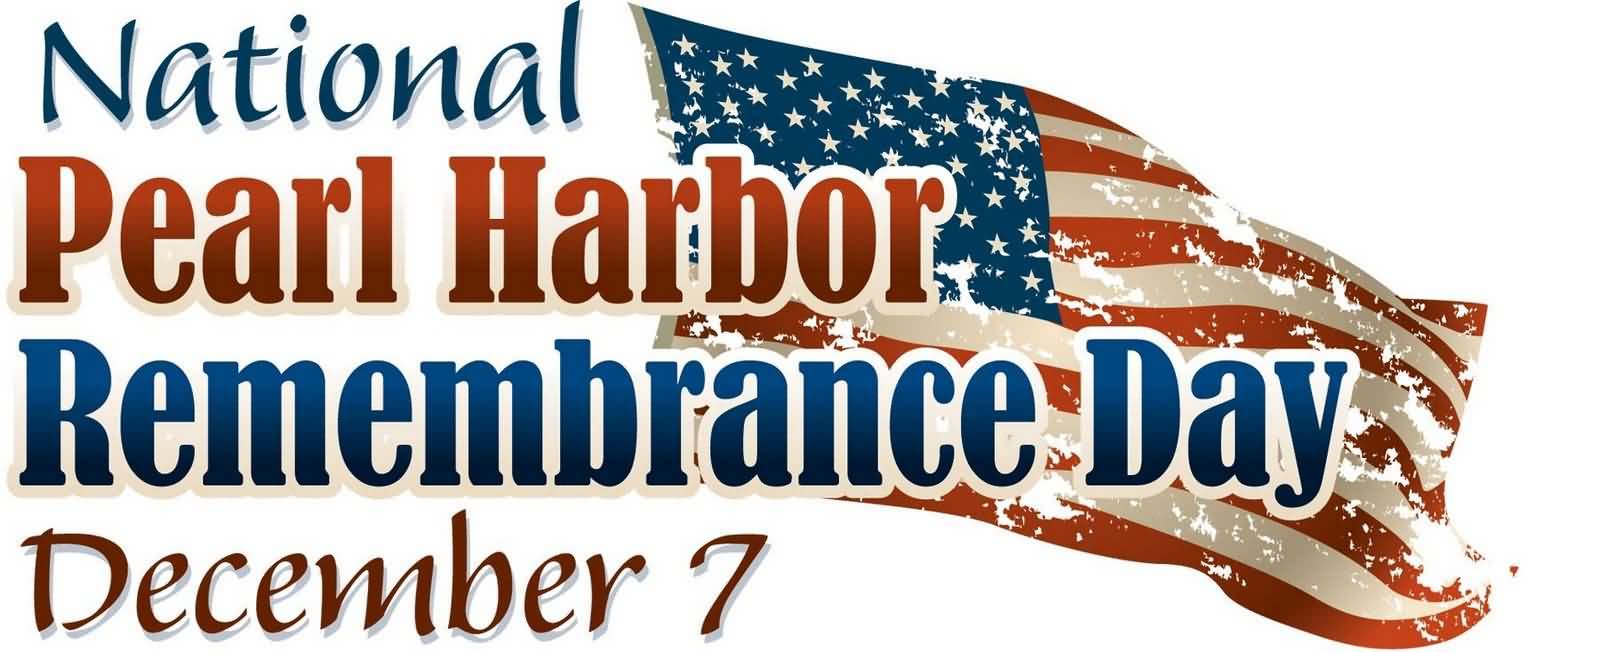 National Pearl Harbor Remembrance Day December 7 Facebook Cover Picture